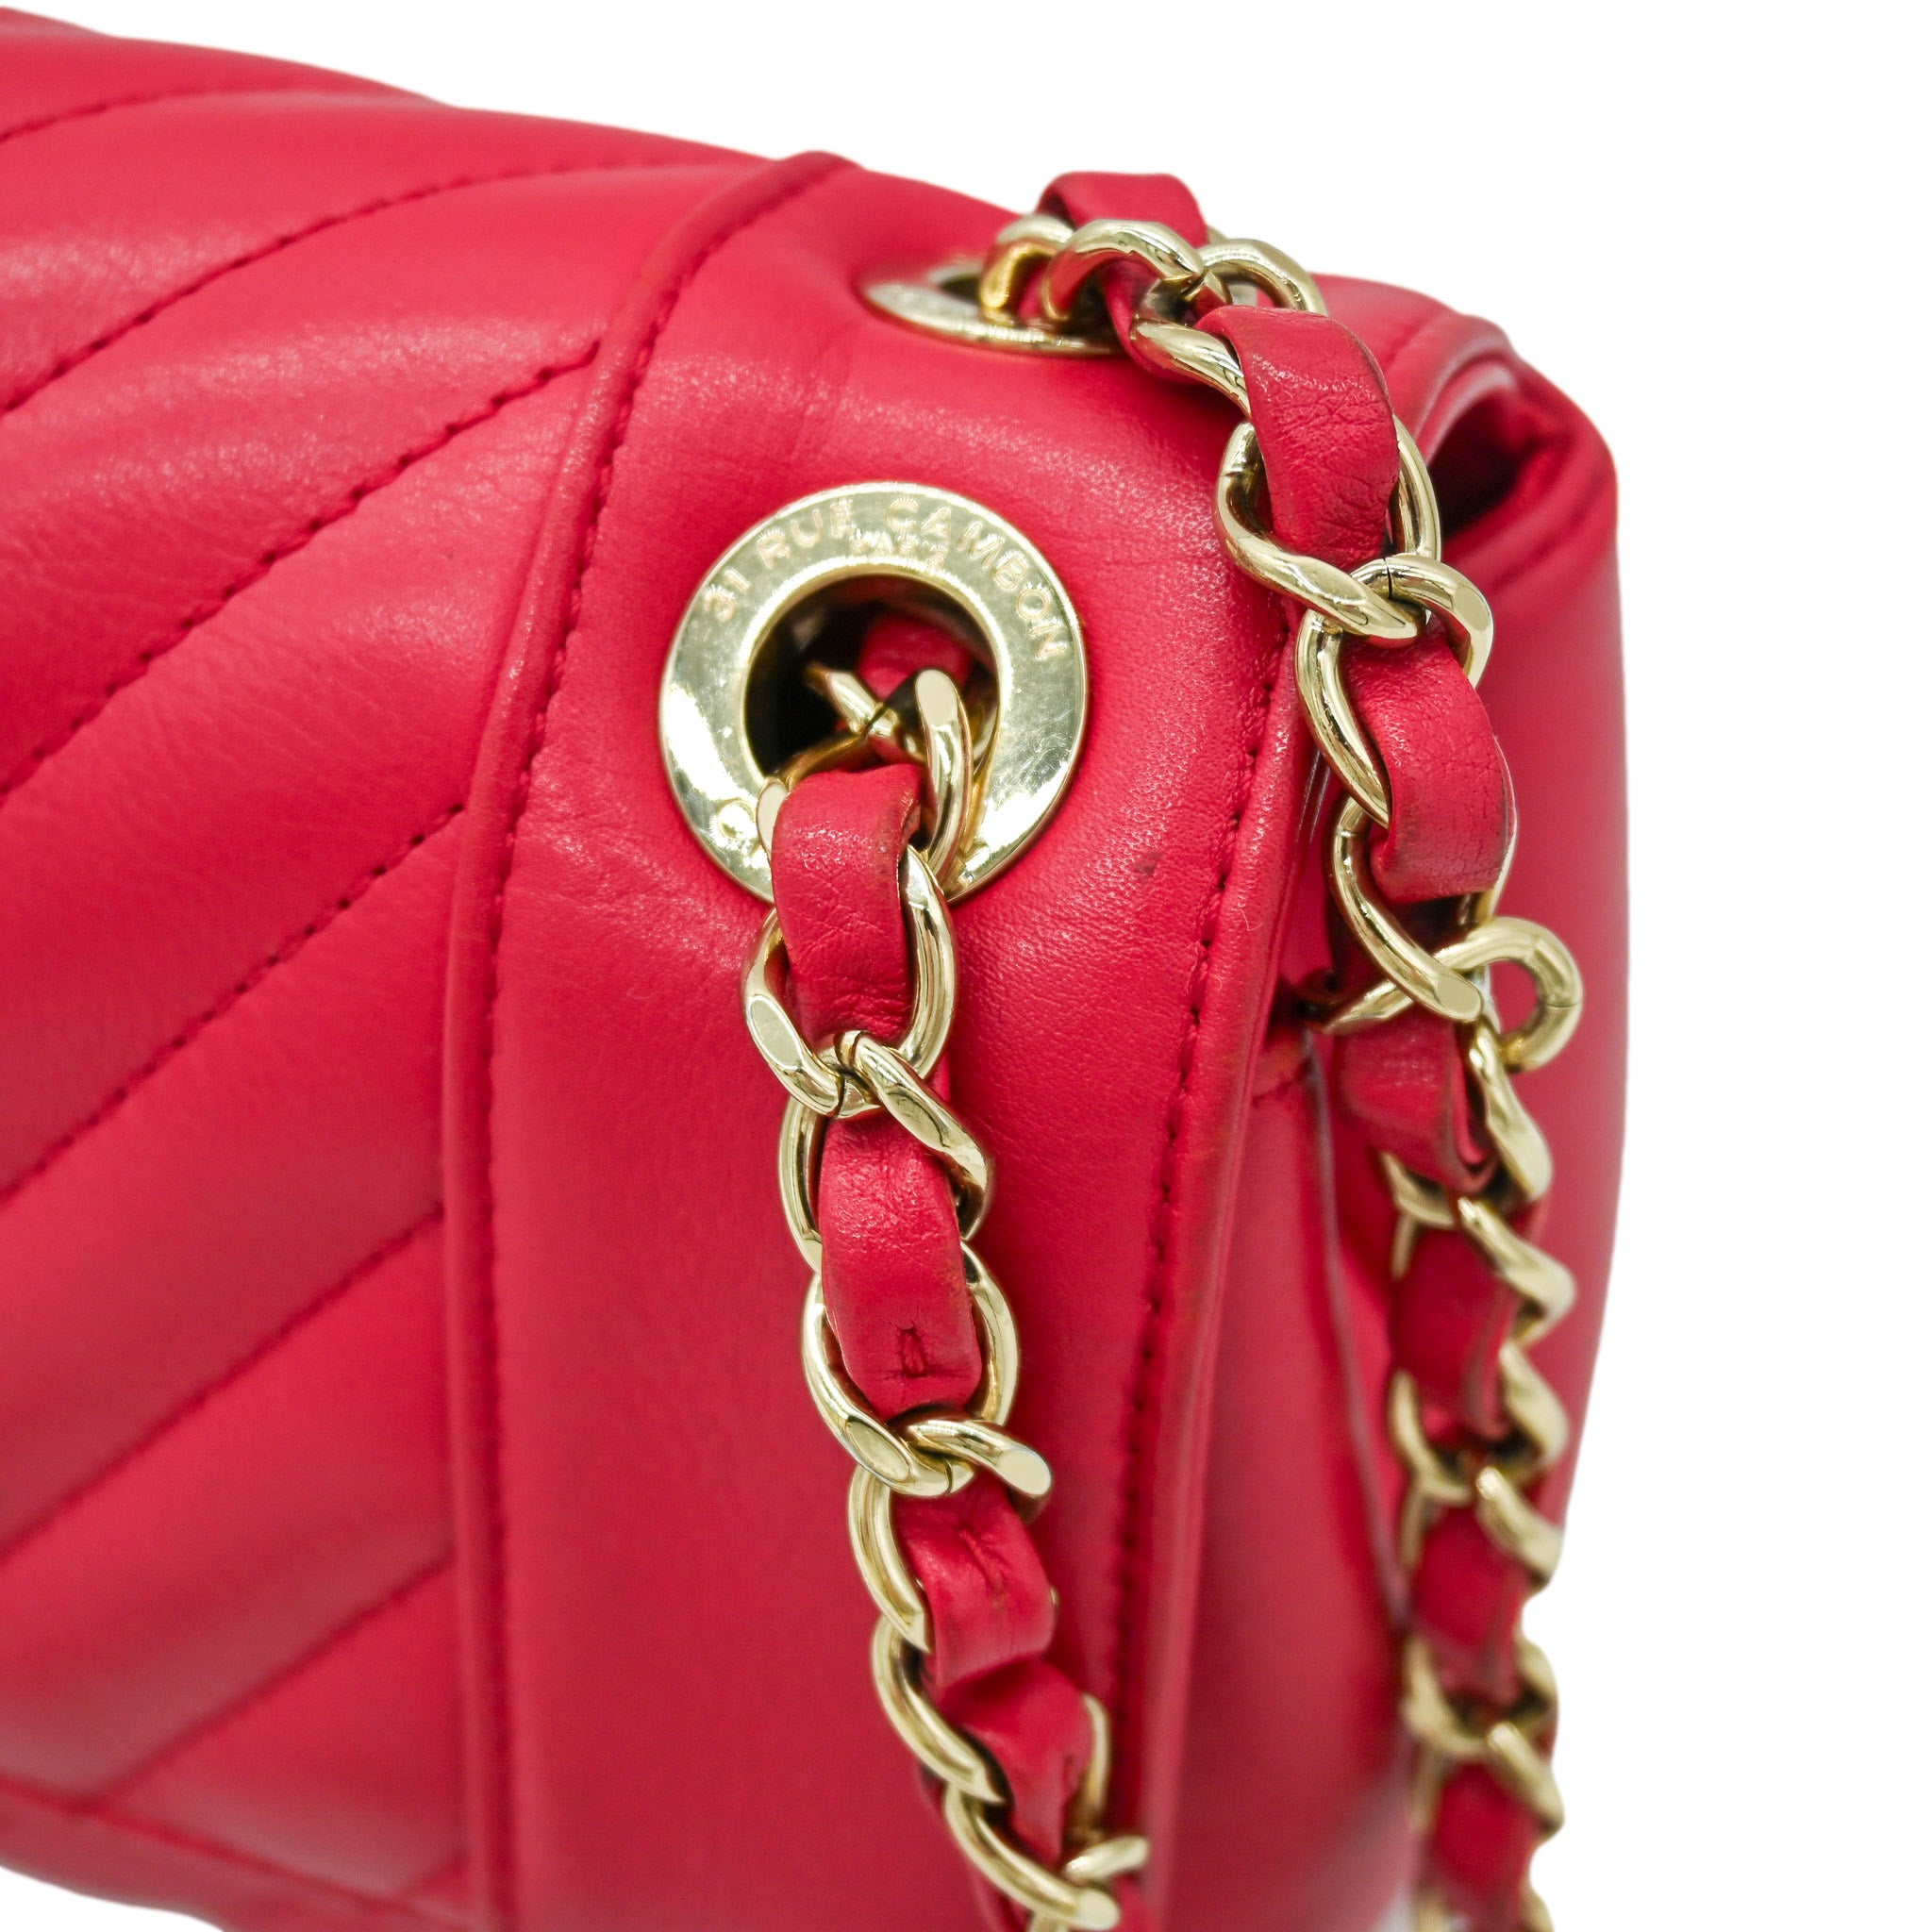 CHANEL Chanel Chevron Daily Small Flap Bag Red - Vault 55